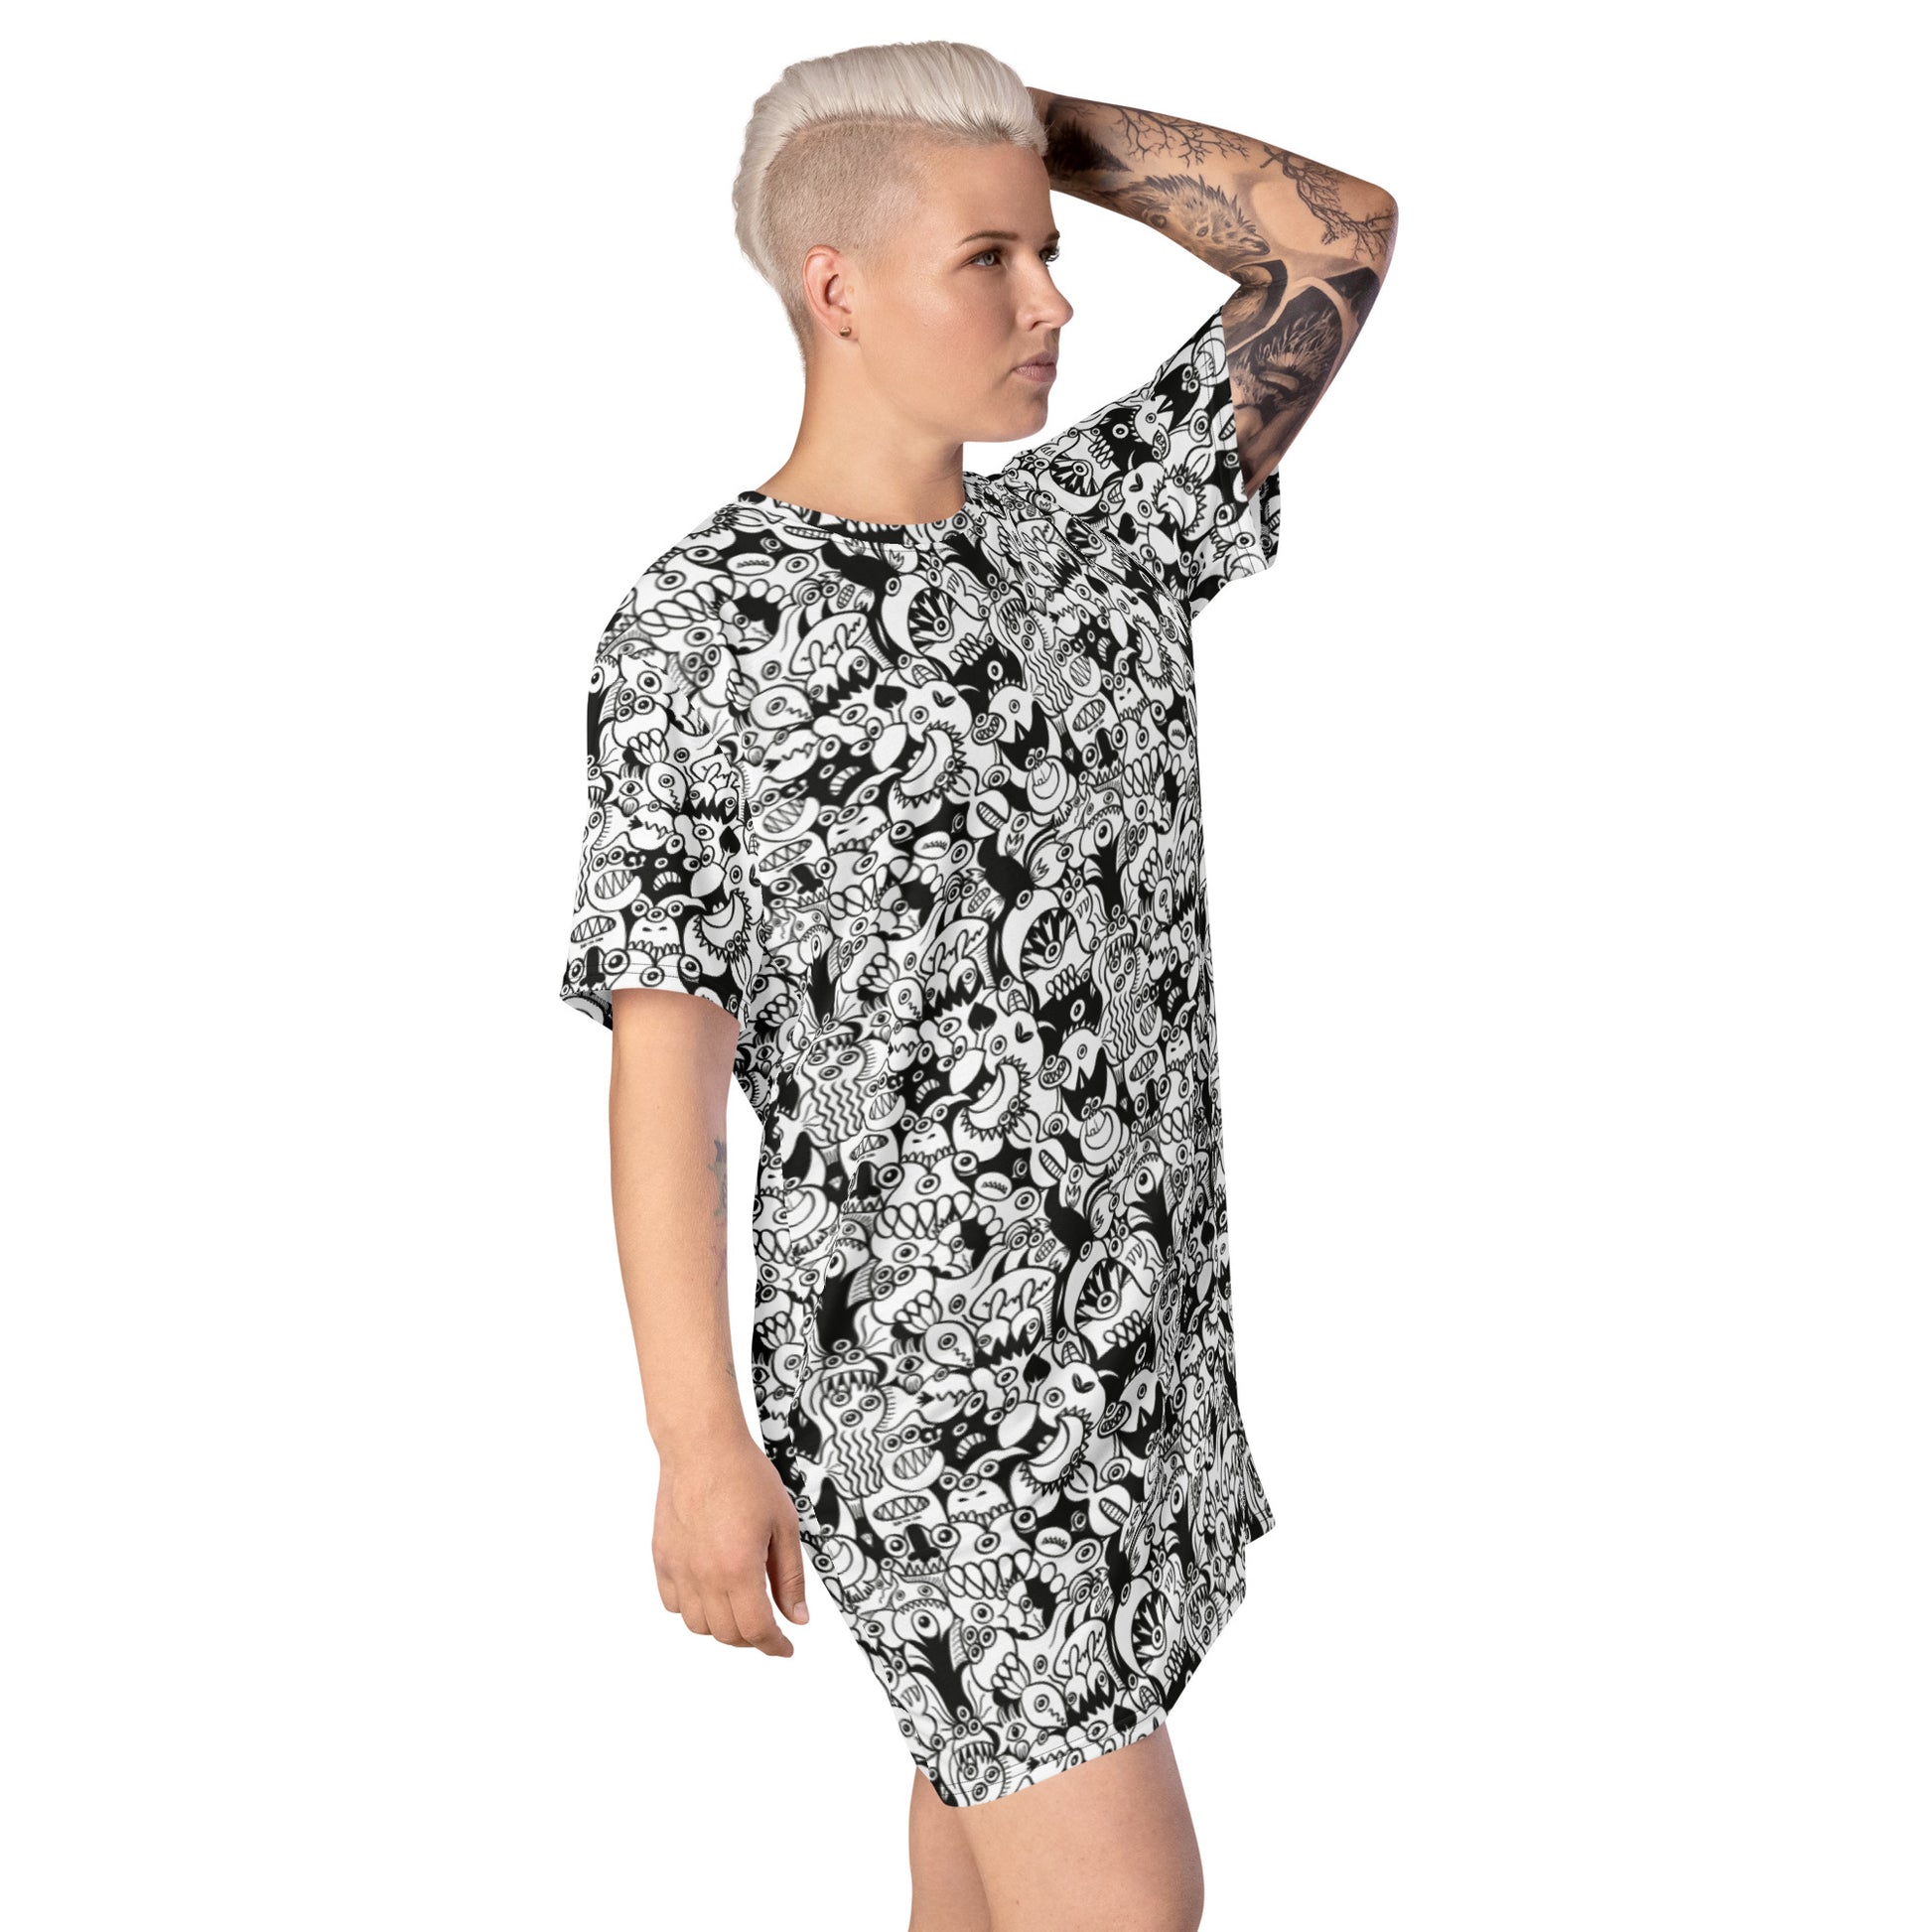 Black and white cool doodles art All-over print T-shirt dress. Side view